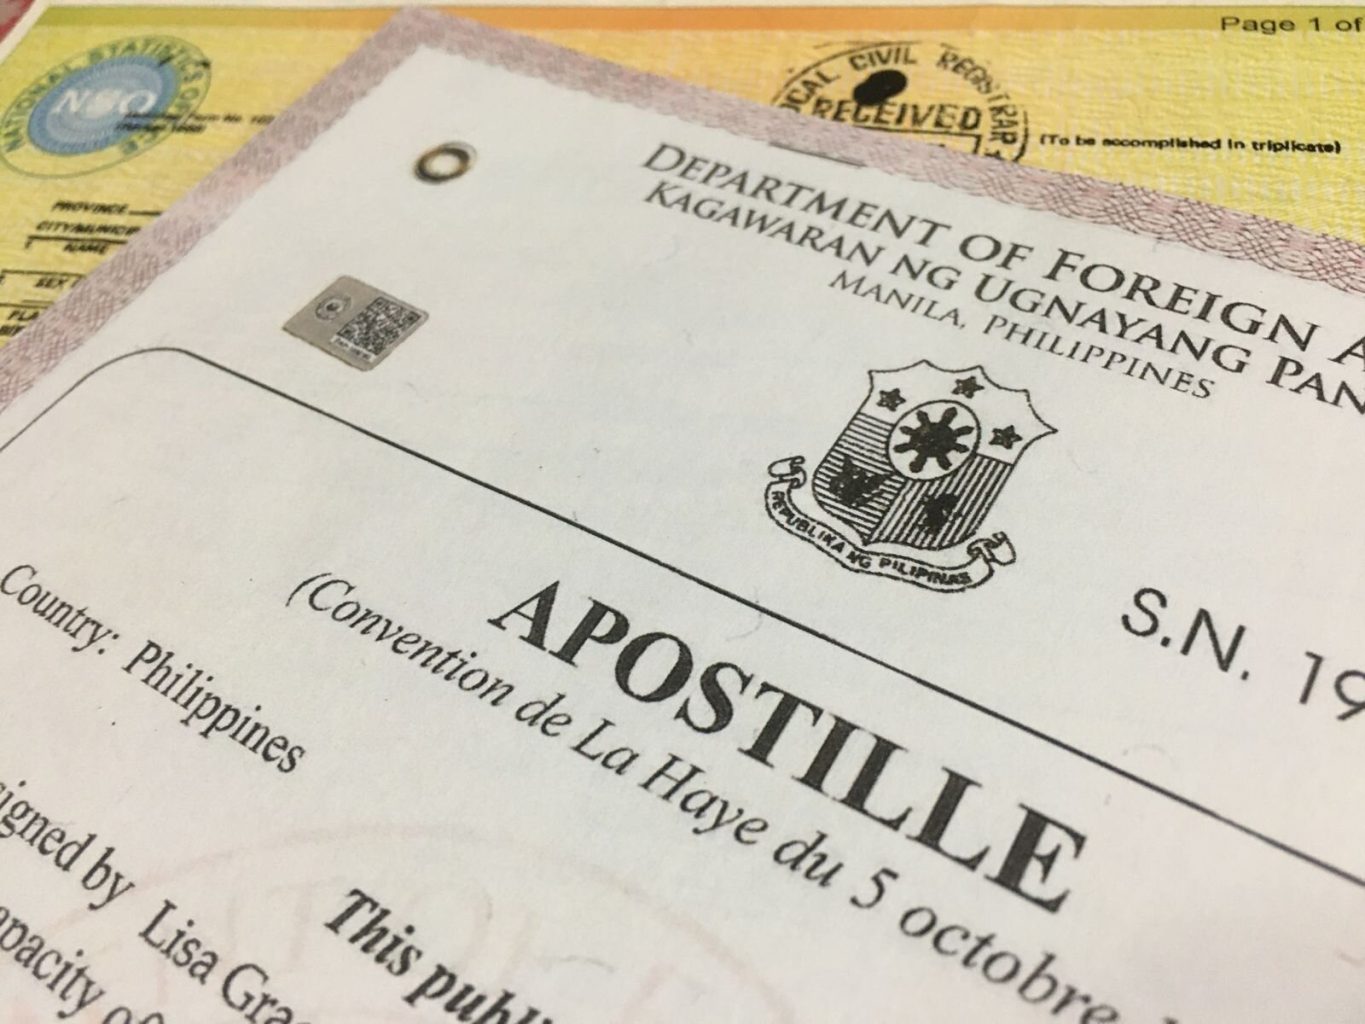 Apostille for consent certified by a notary